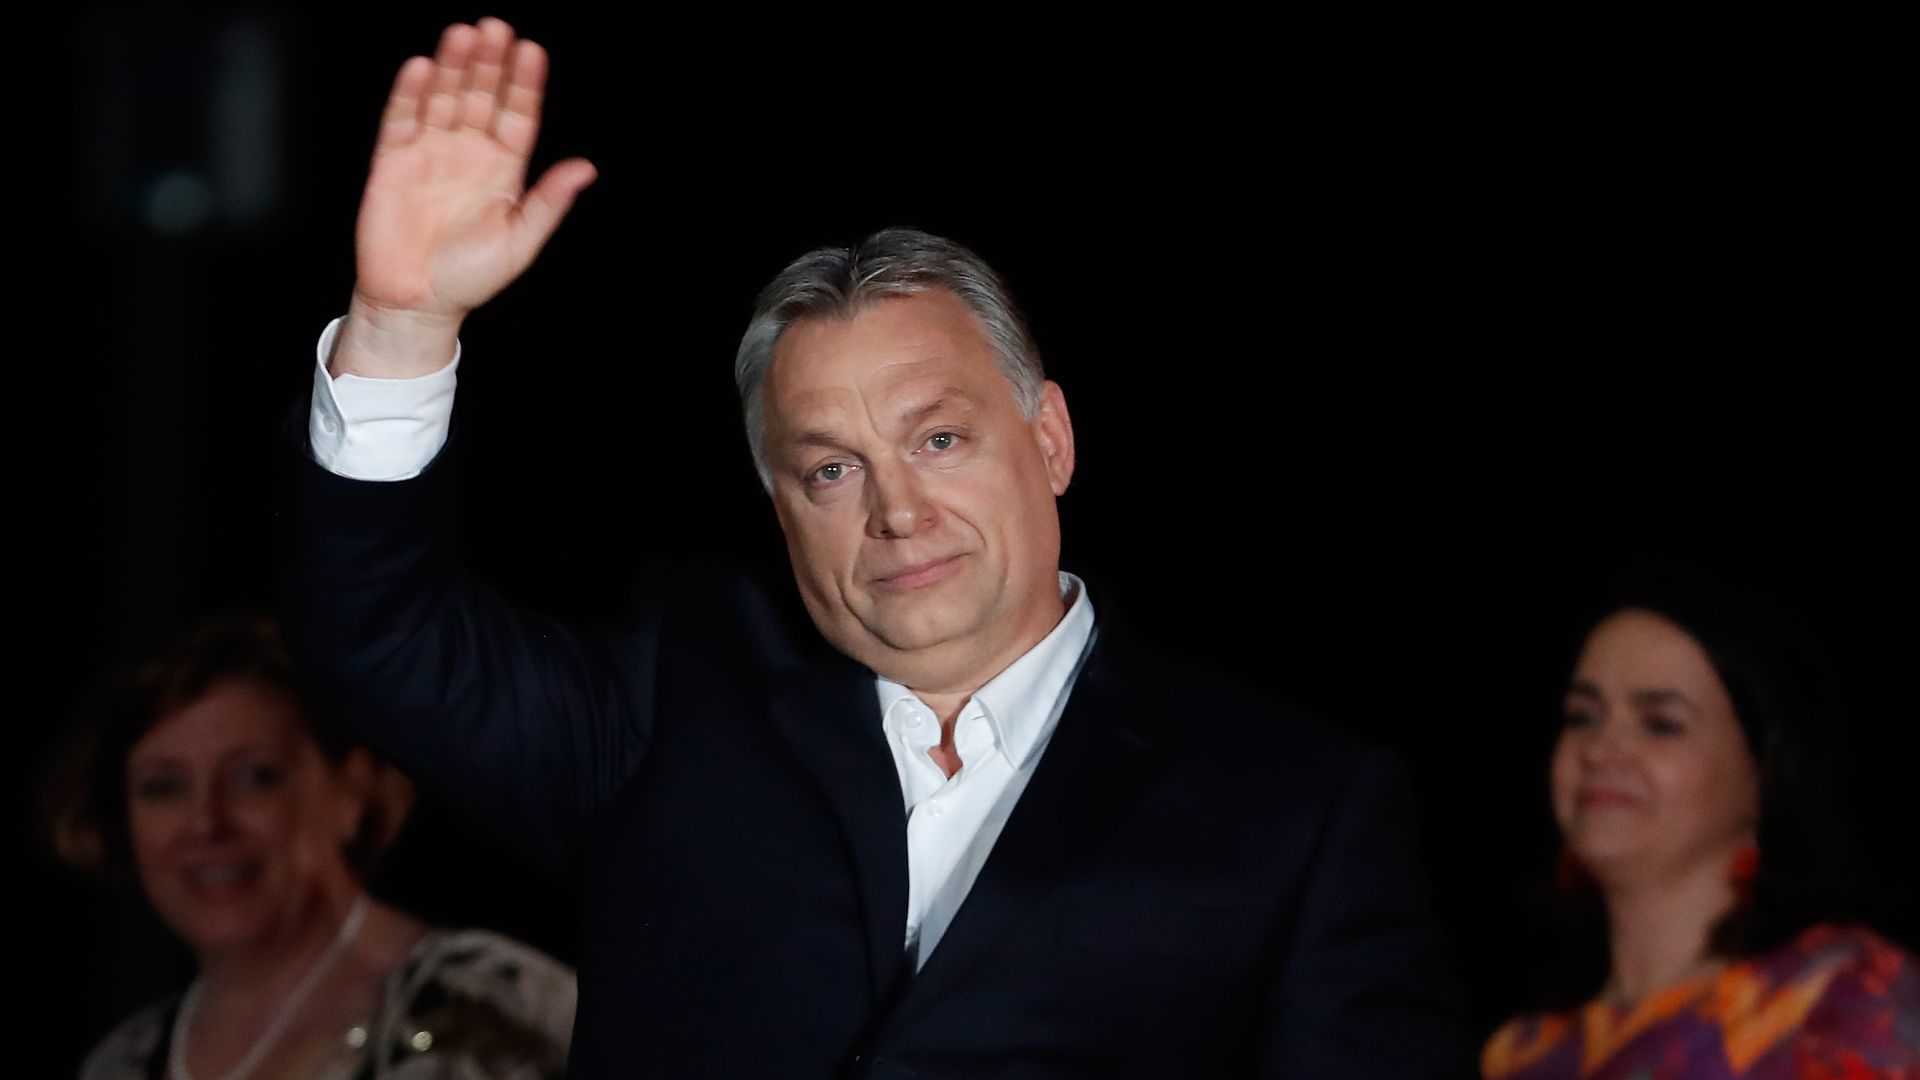 Viktor Orban waving to crowd of supporters